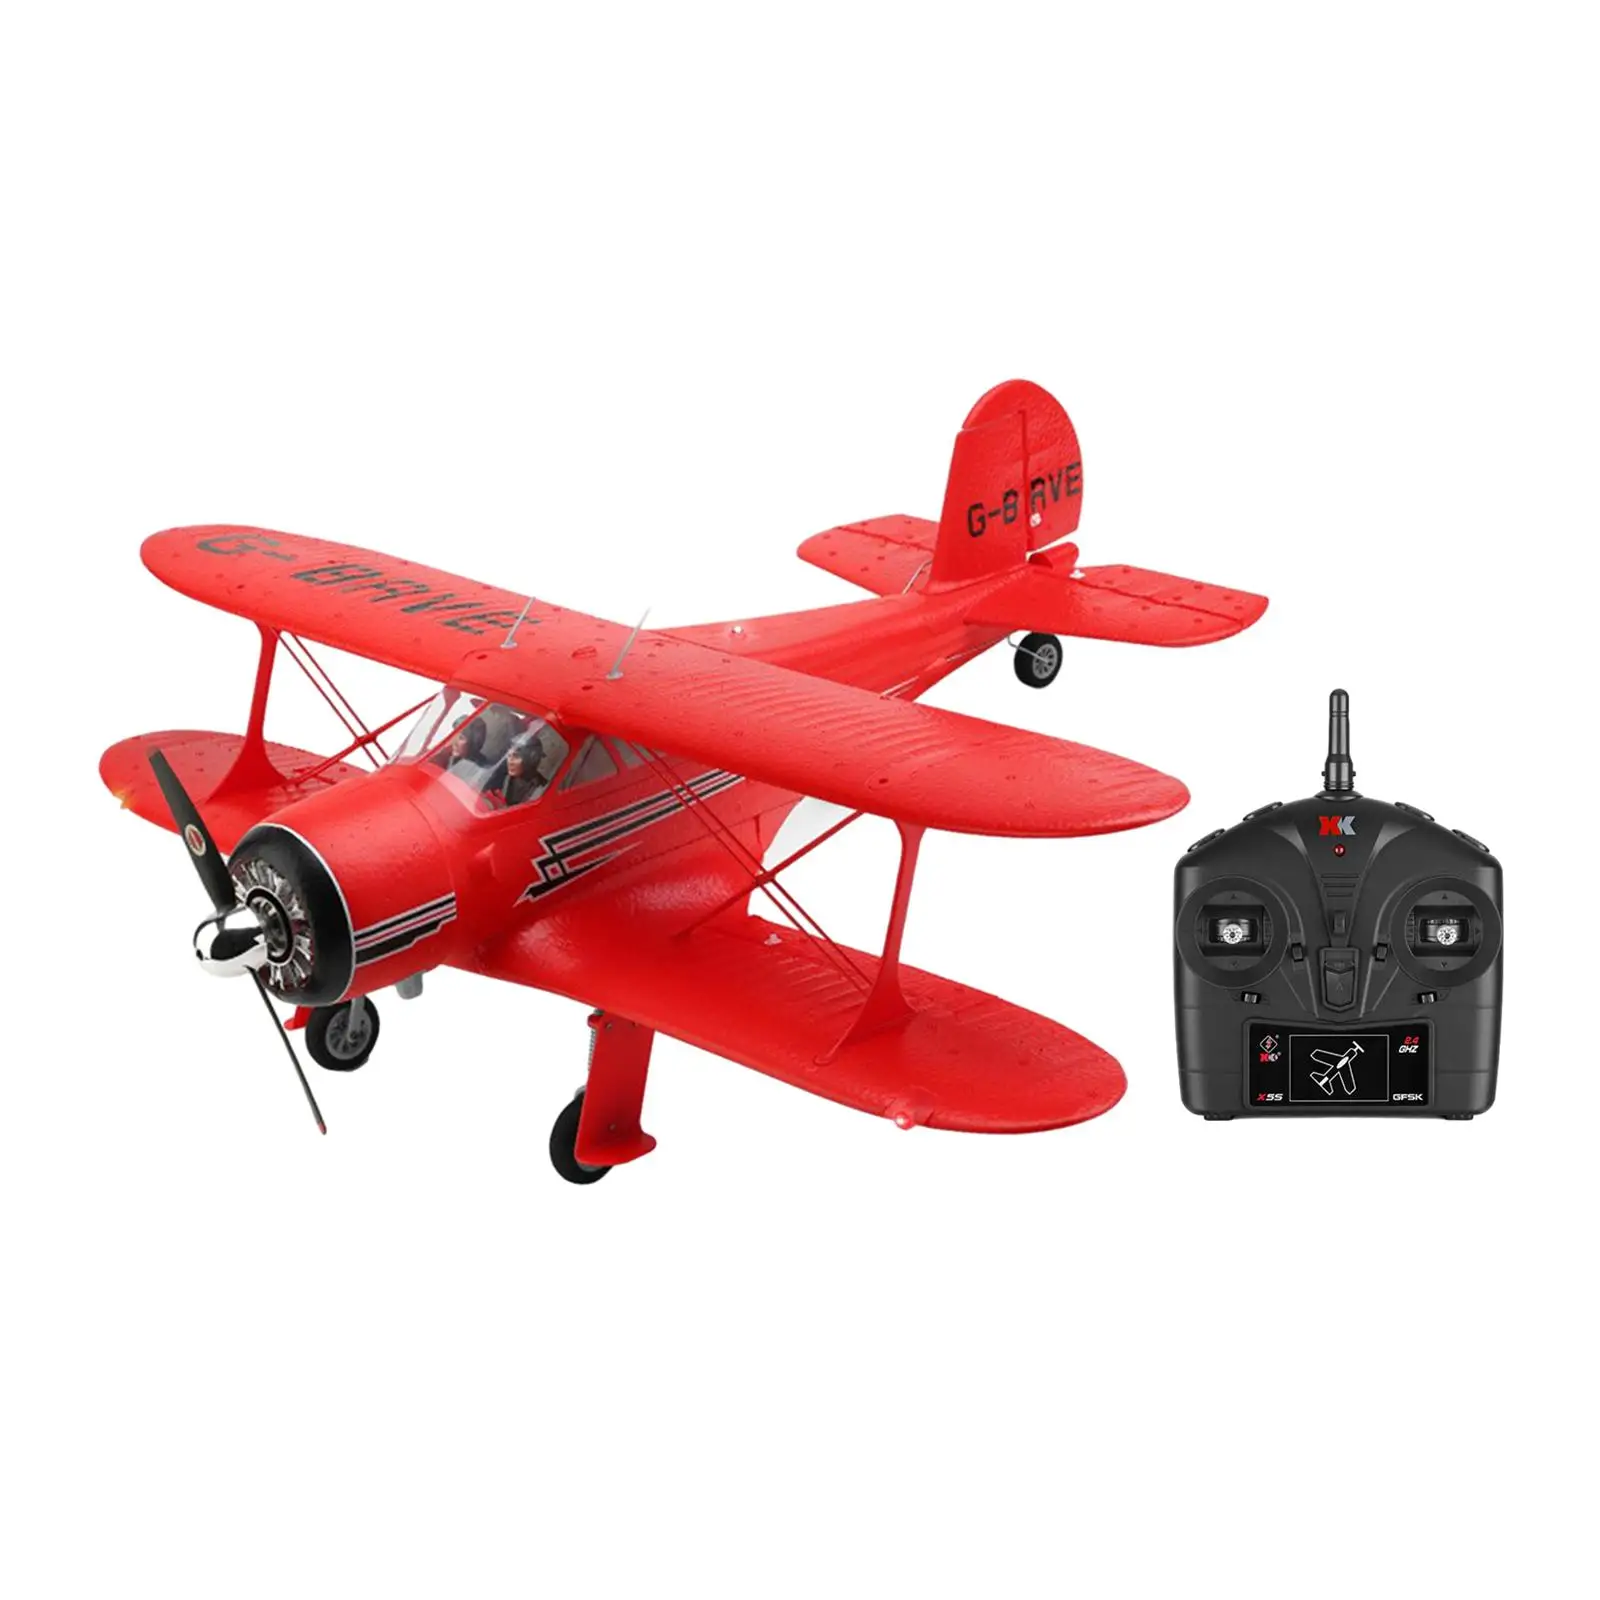 Wltoys A300 Beech D17S RC Plane with 3D/6G Mode Brushless Motor Easy to Fly 4 Channel EPP Biplane for Kids Adults Beginner Gifts